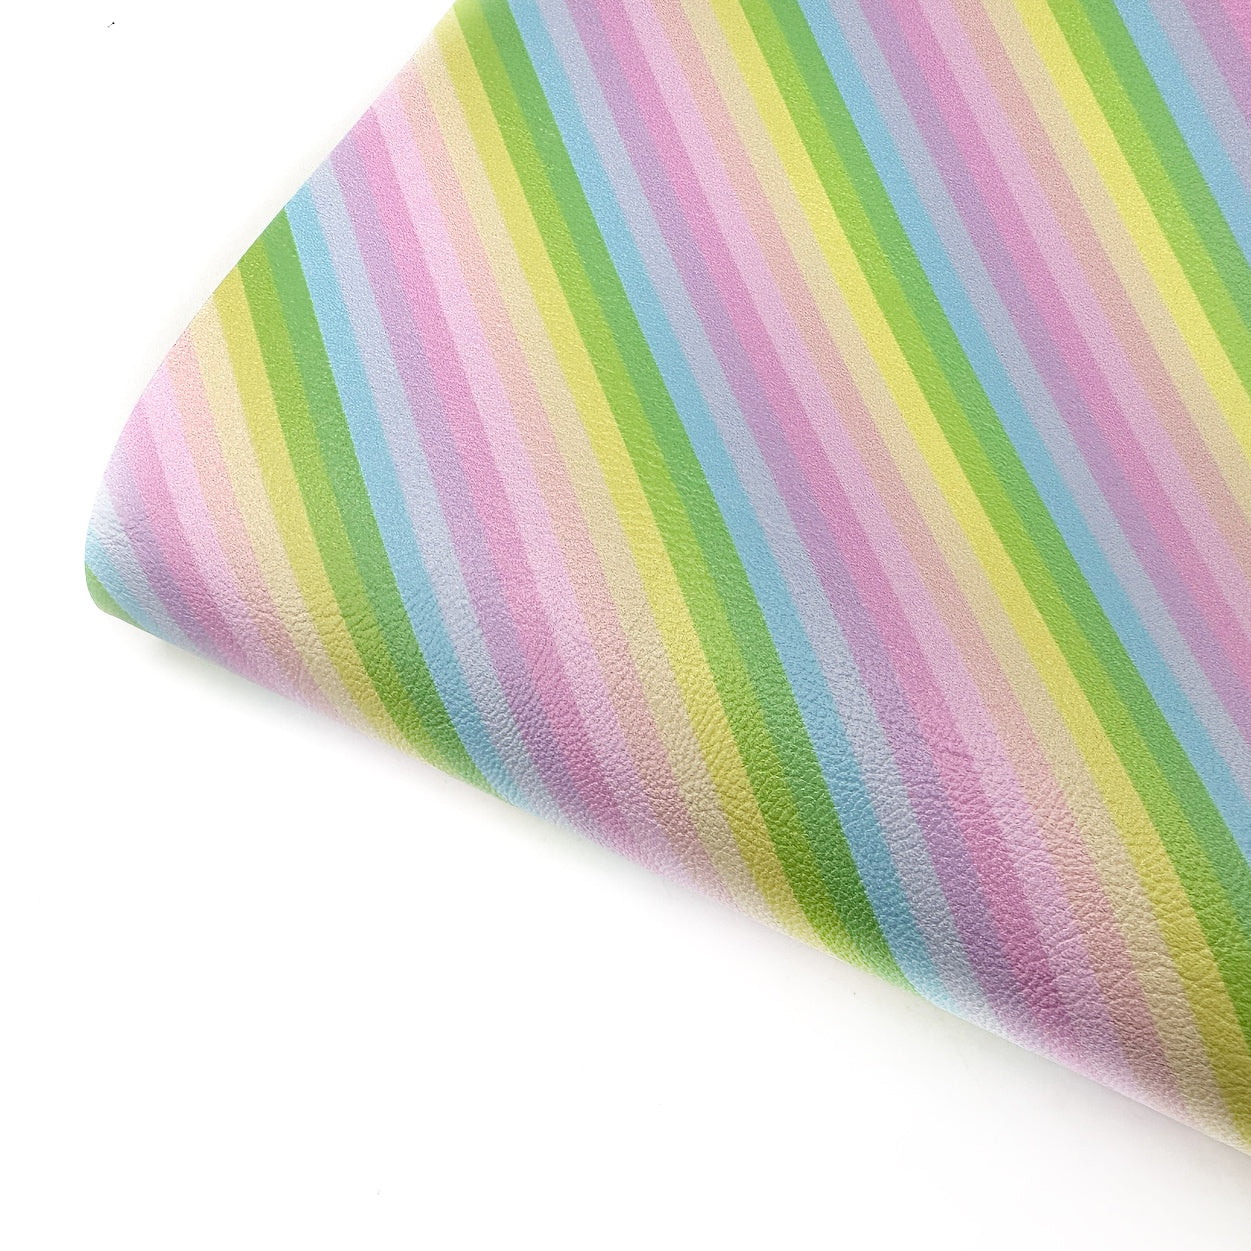 Pastel Rainbow Candy Stripes Premium Faux Leather Fabric Sheets